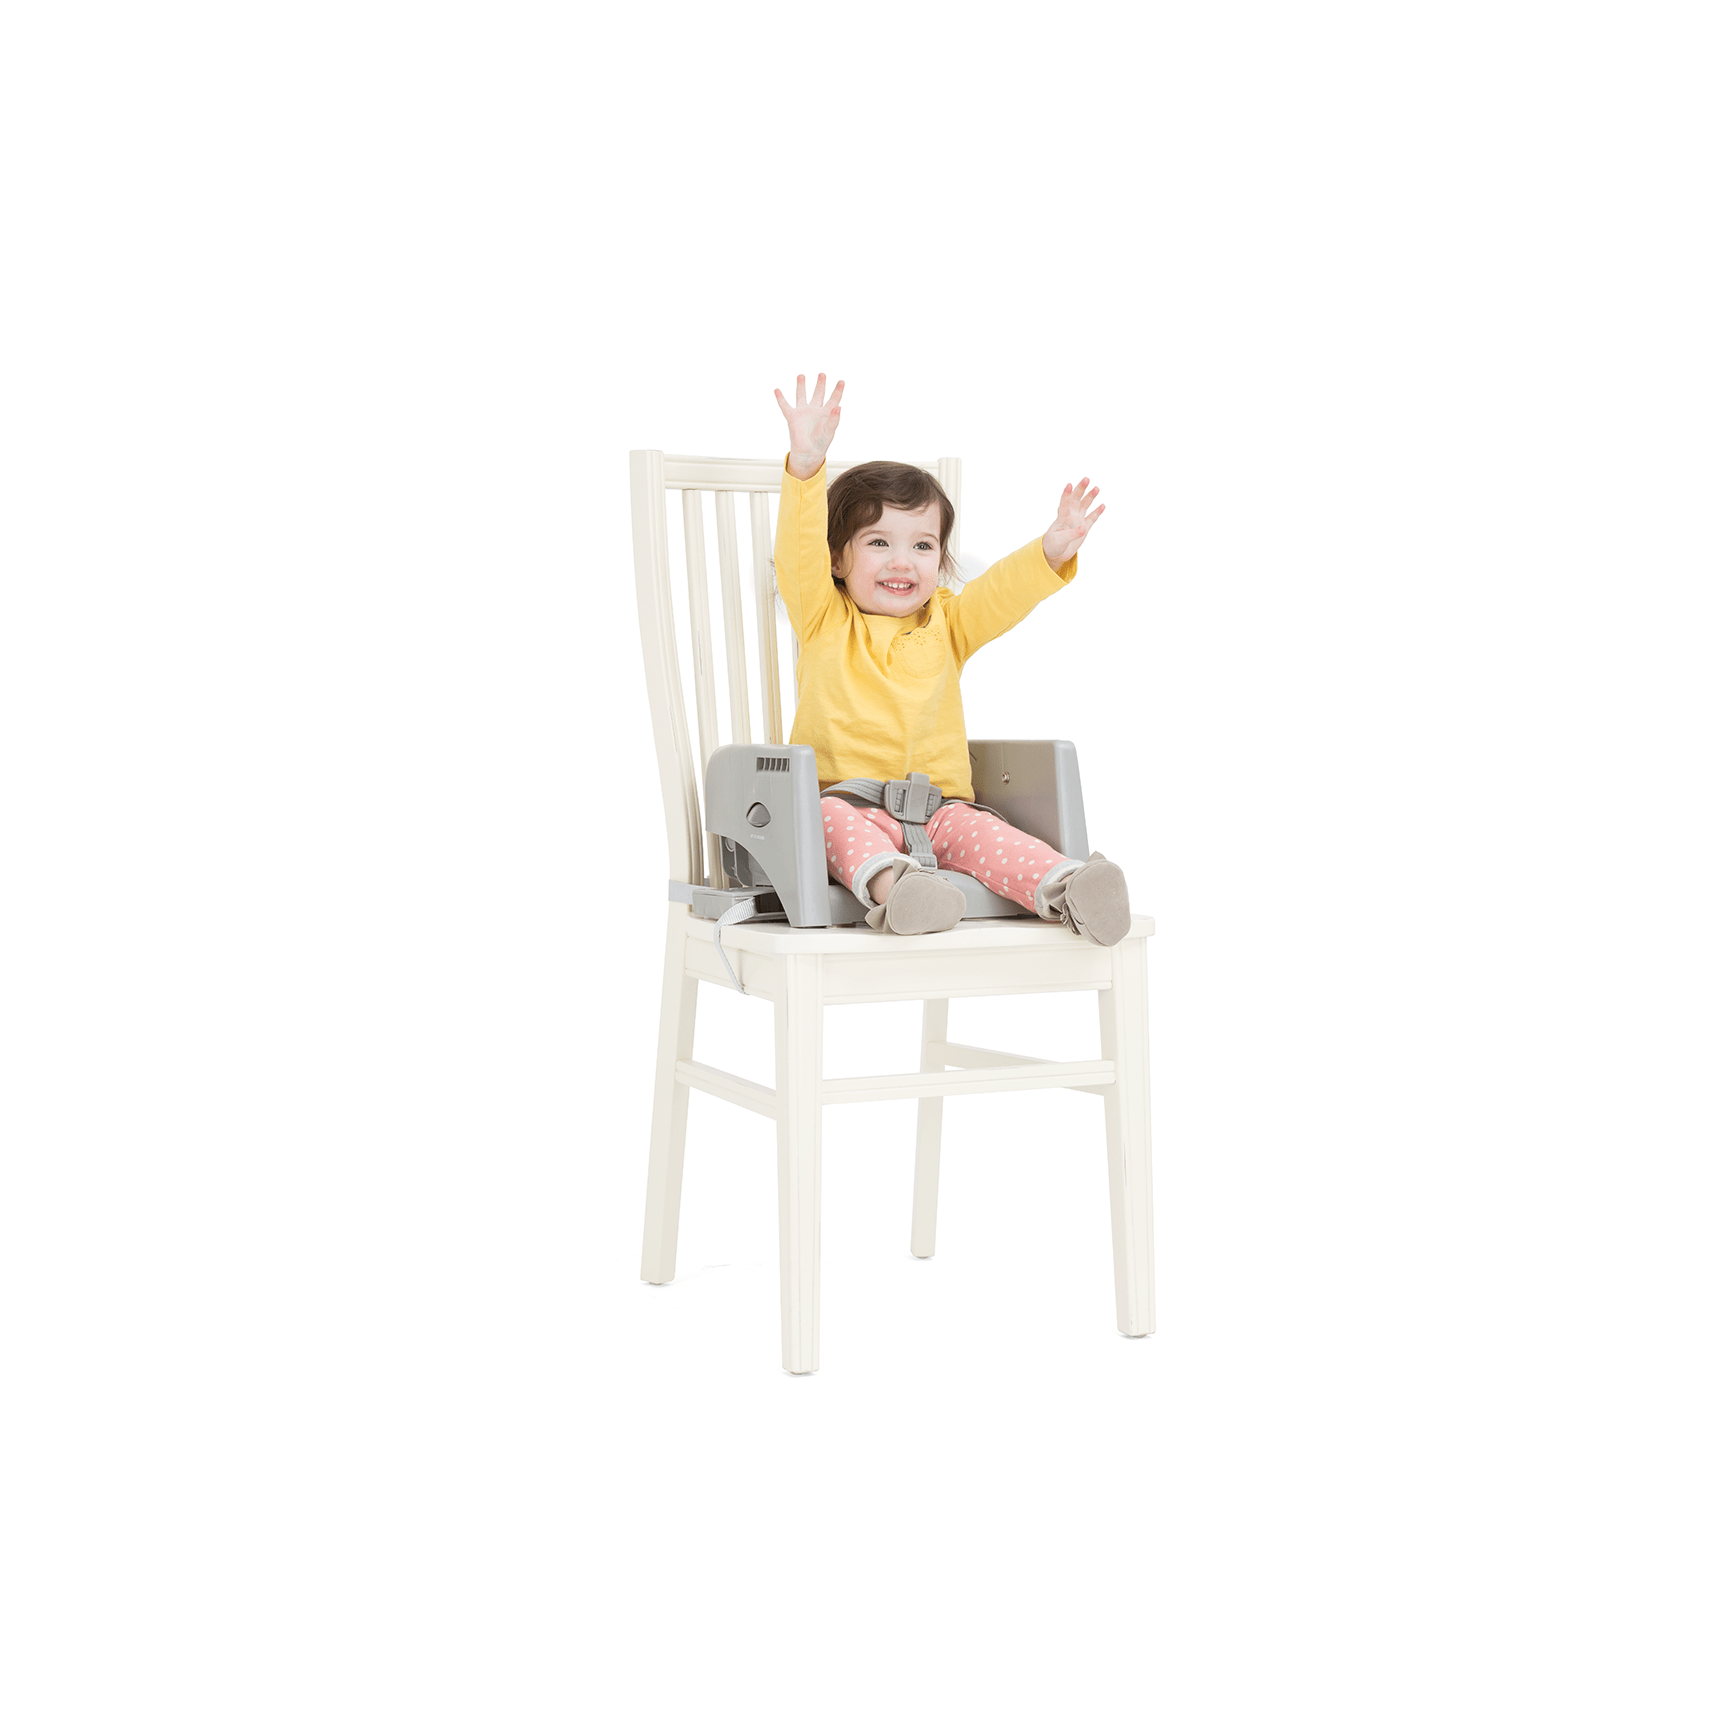 Joie Multiply 6in1 Highchair in Portrait Baby Highchairs H1605AAPOR000 5056080612089